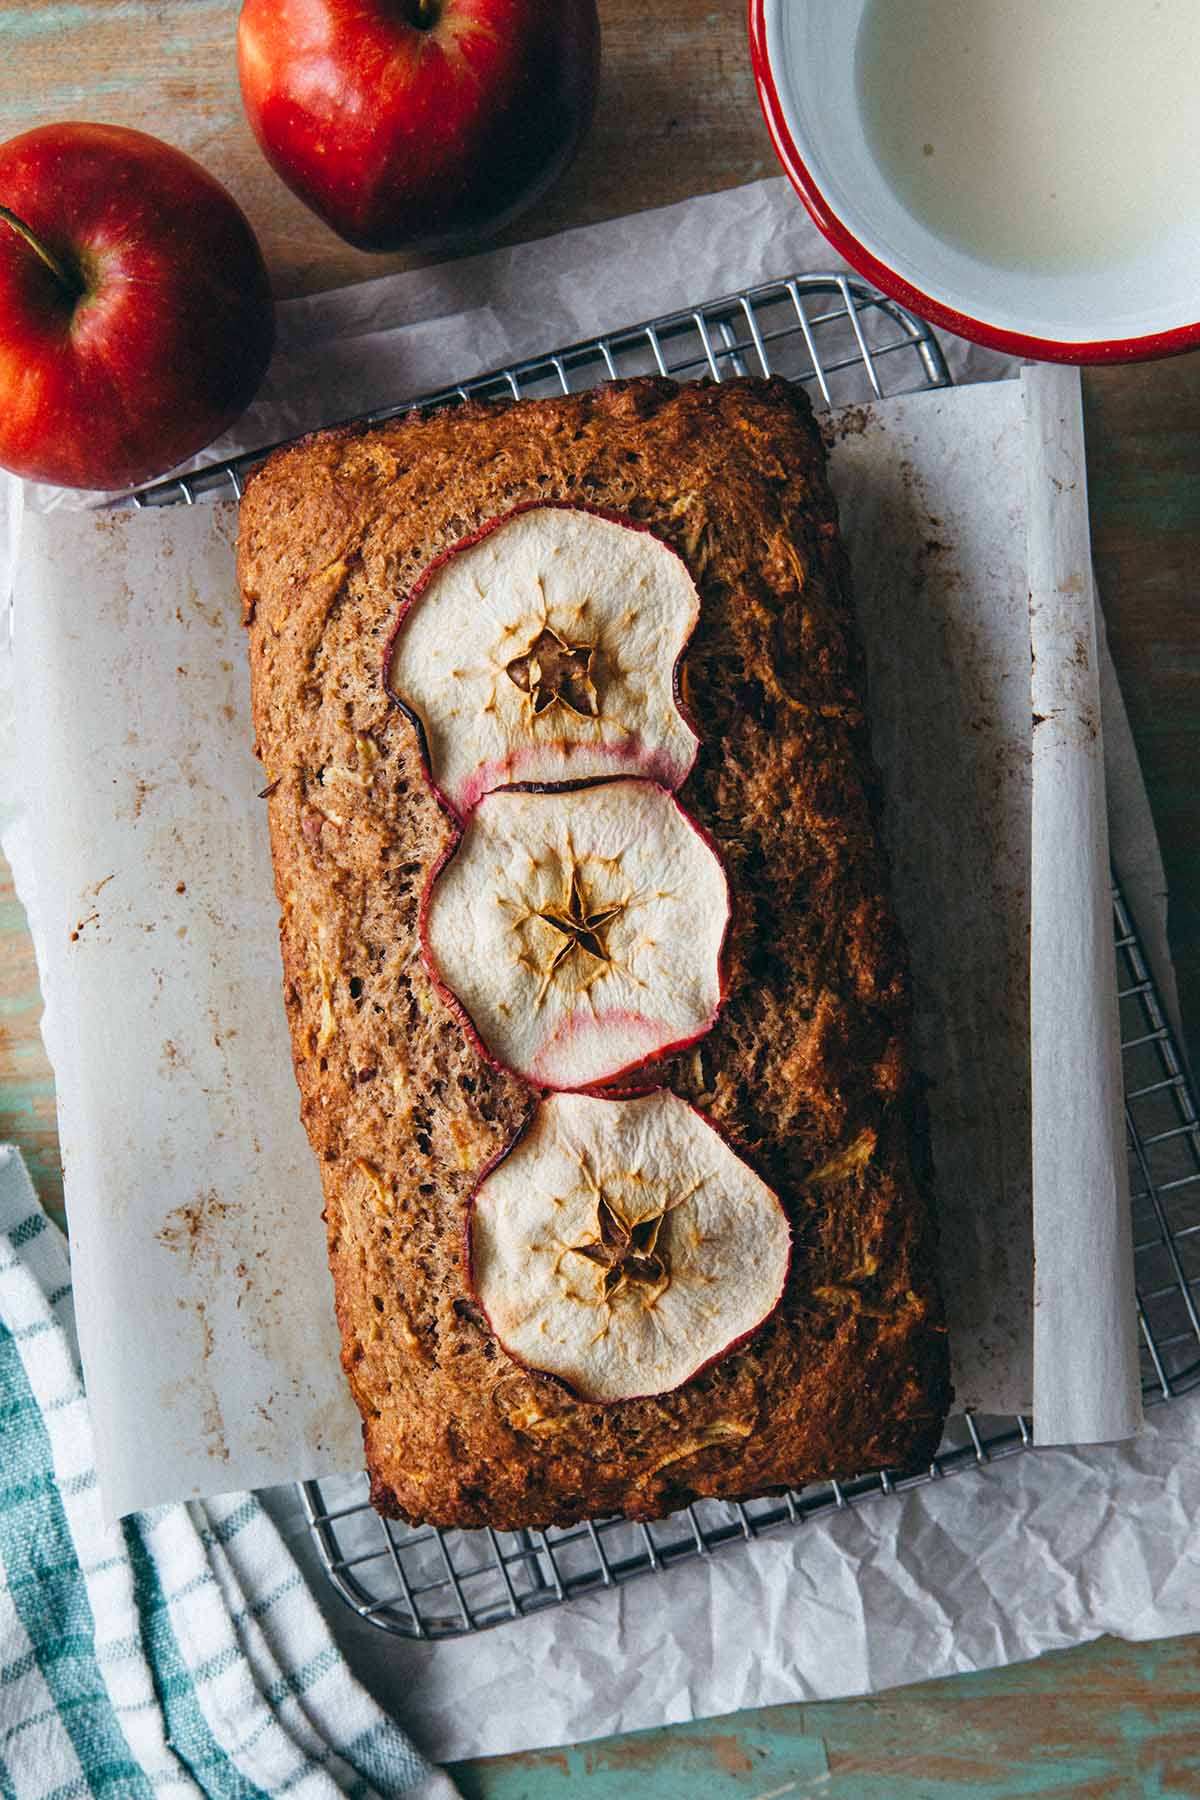 A fully baked apple loaf cake cooking on a wire rack.